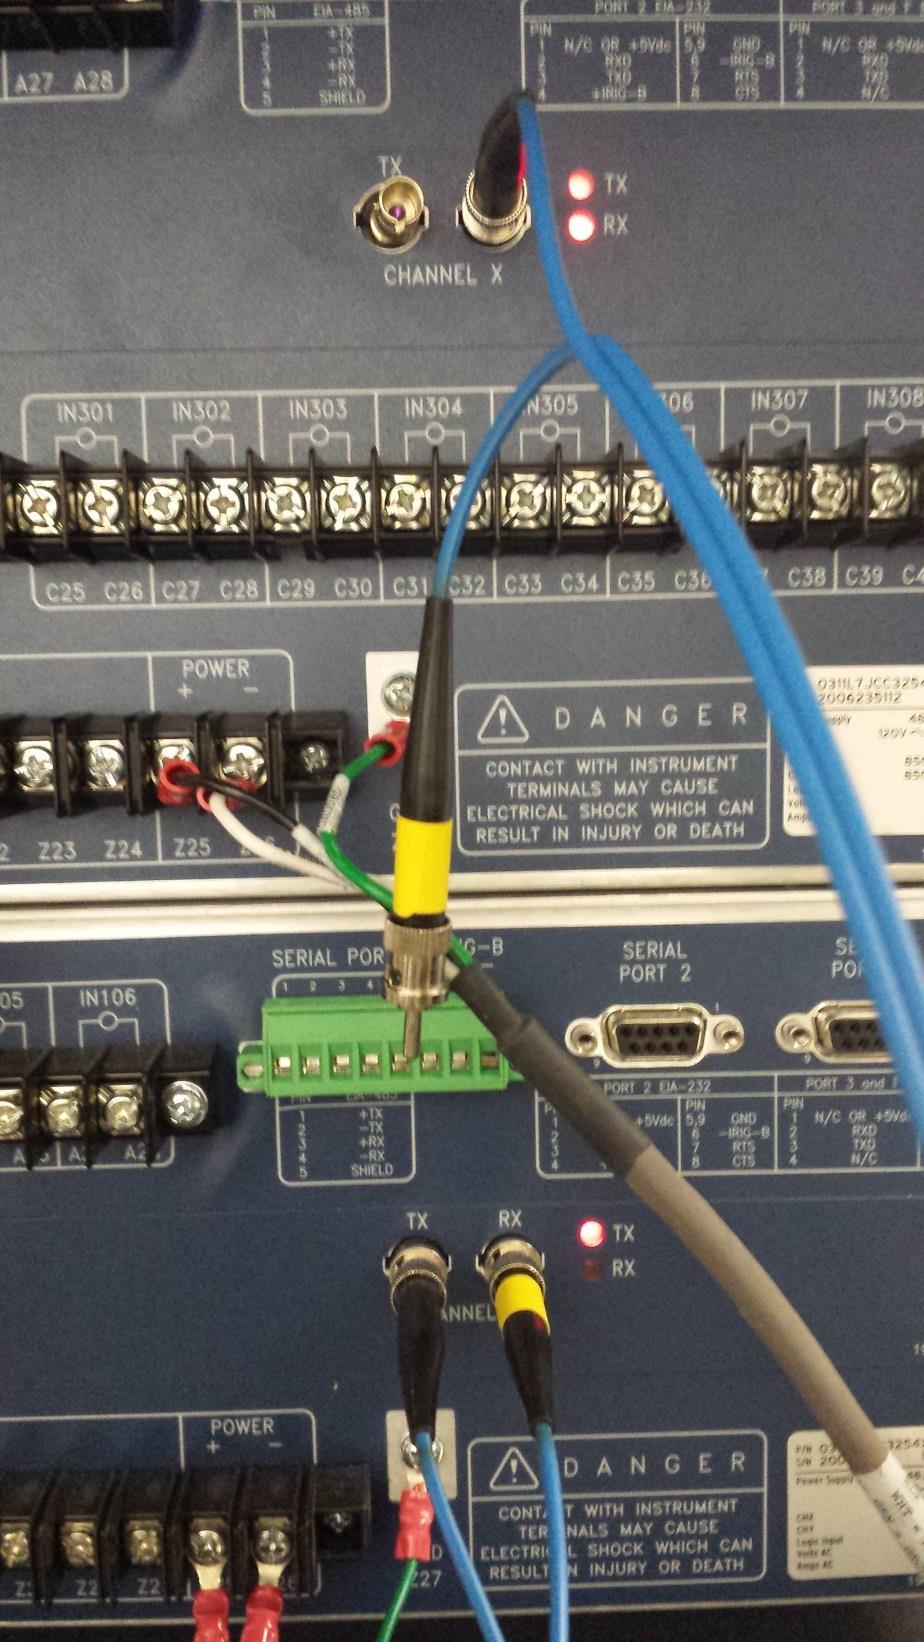 In cases where the communication channel fails, or one of the relays stops working, the 87CH FAIL LED on the front panel of the relays will light up to denote that a communication failure has